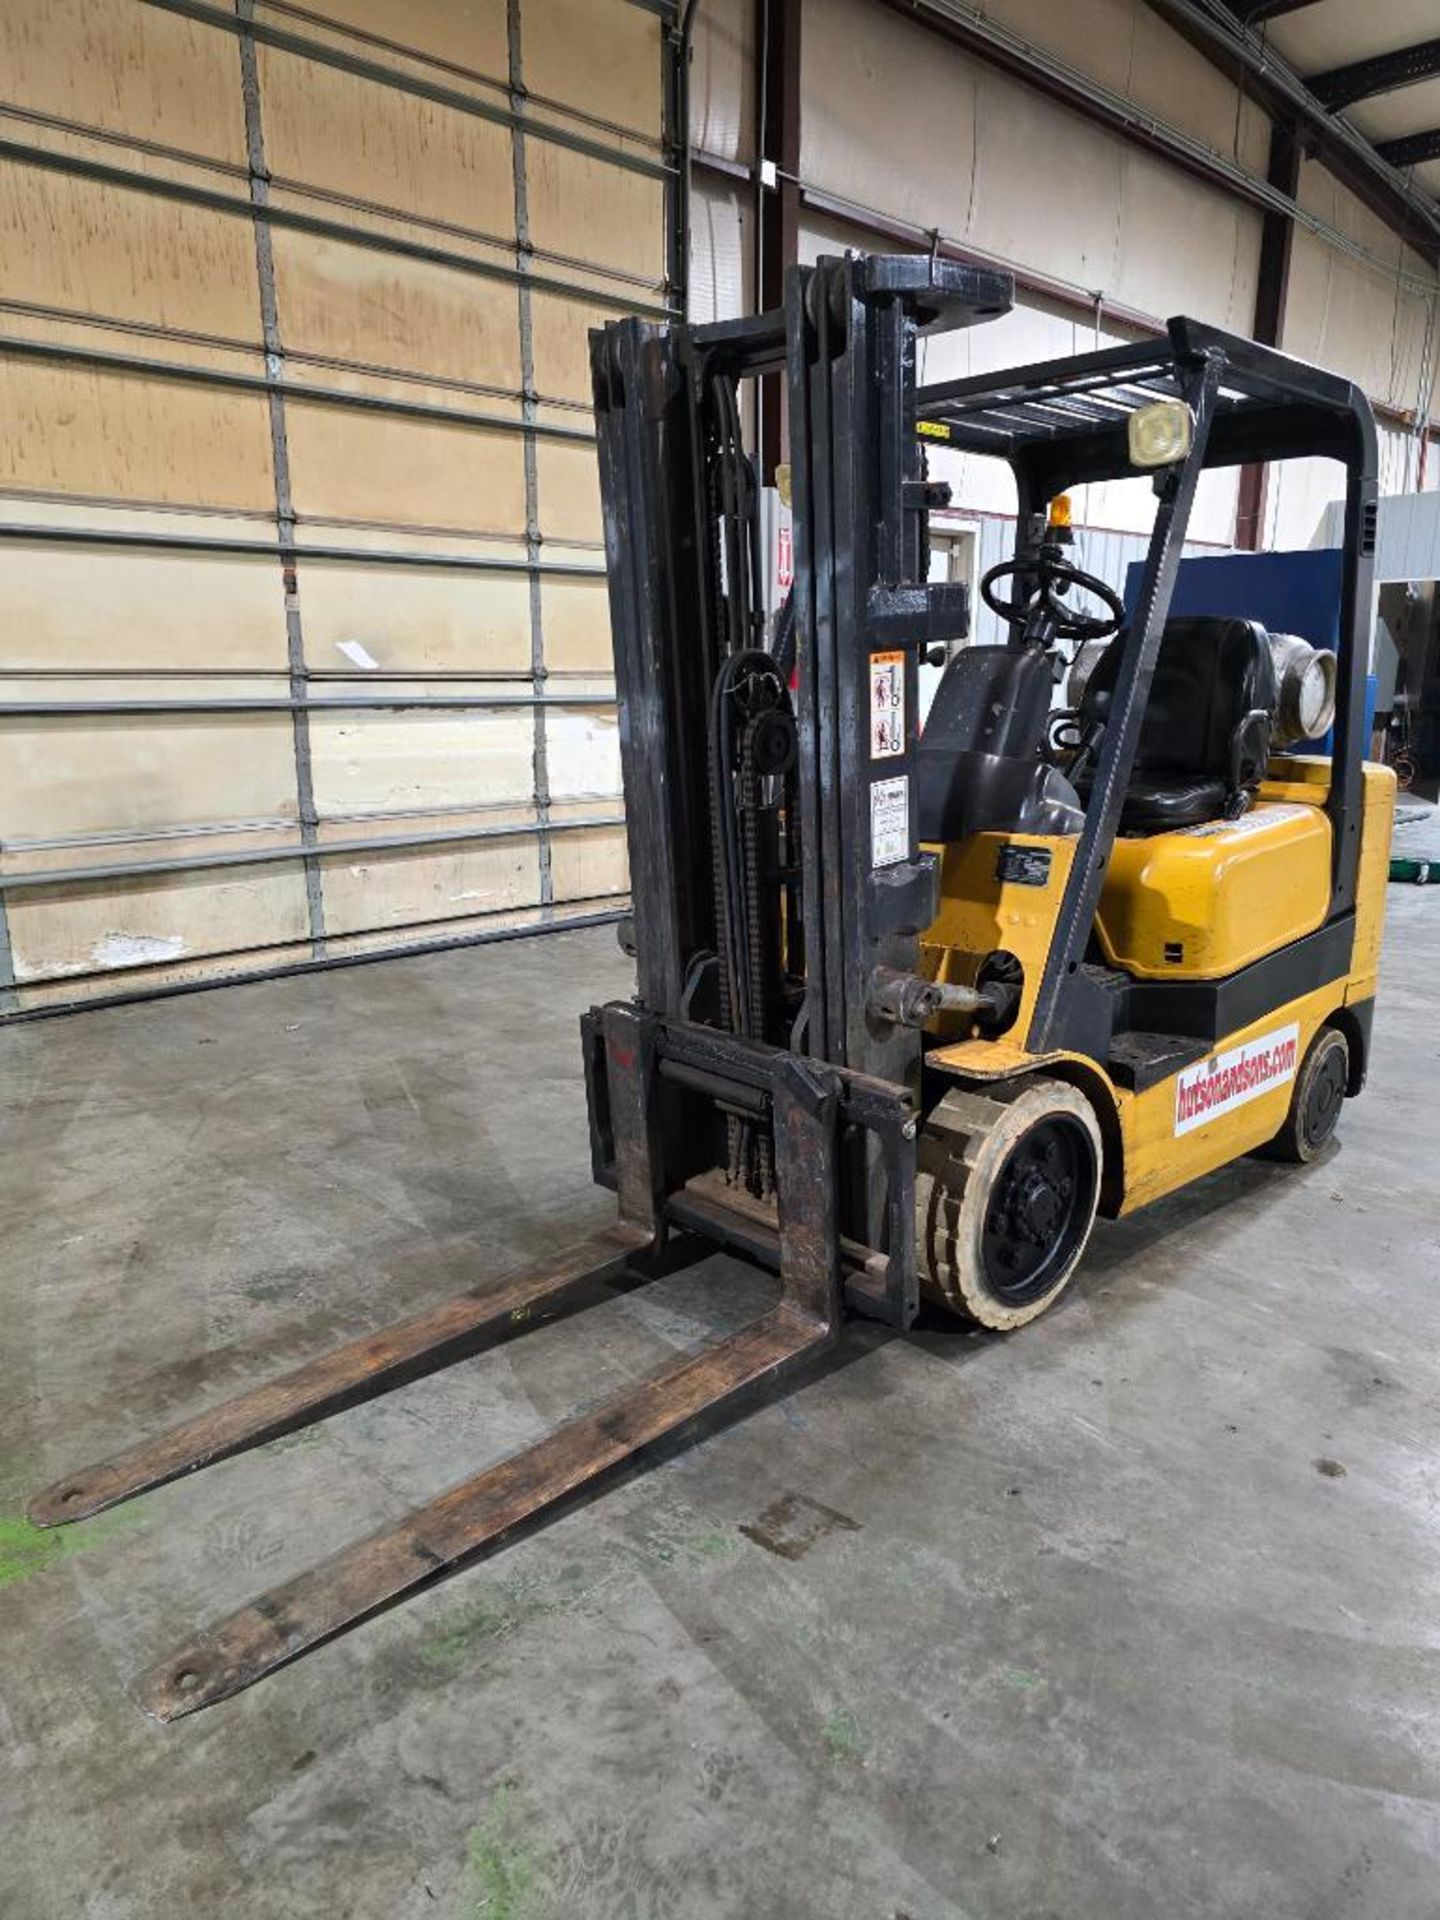 Caterpillar 5,000-LB. Capacity Forklift, Model CG25, LPG, 3,000 Hours, 188" Lift Height, S/N AT82001 - Image 2 of 12